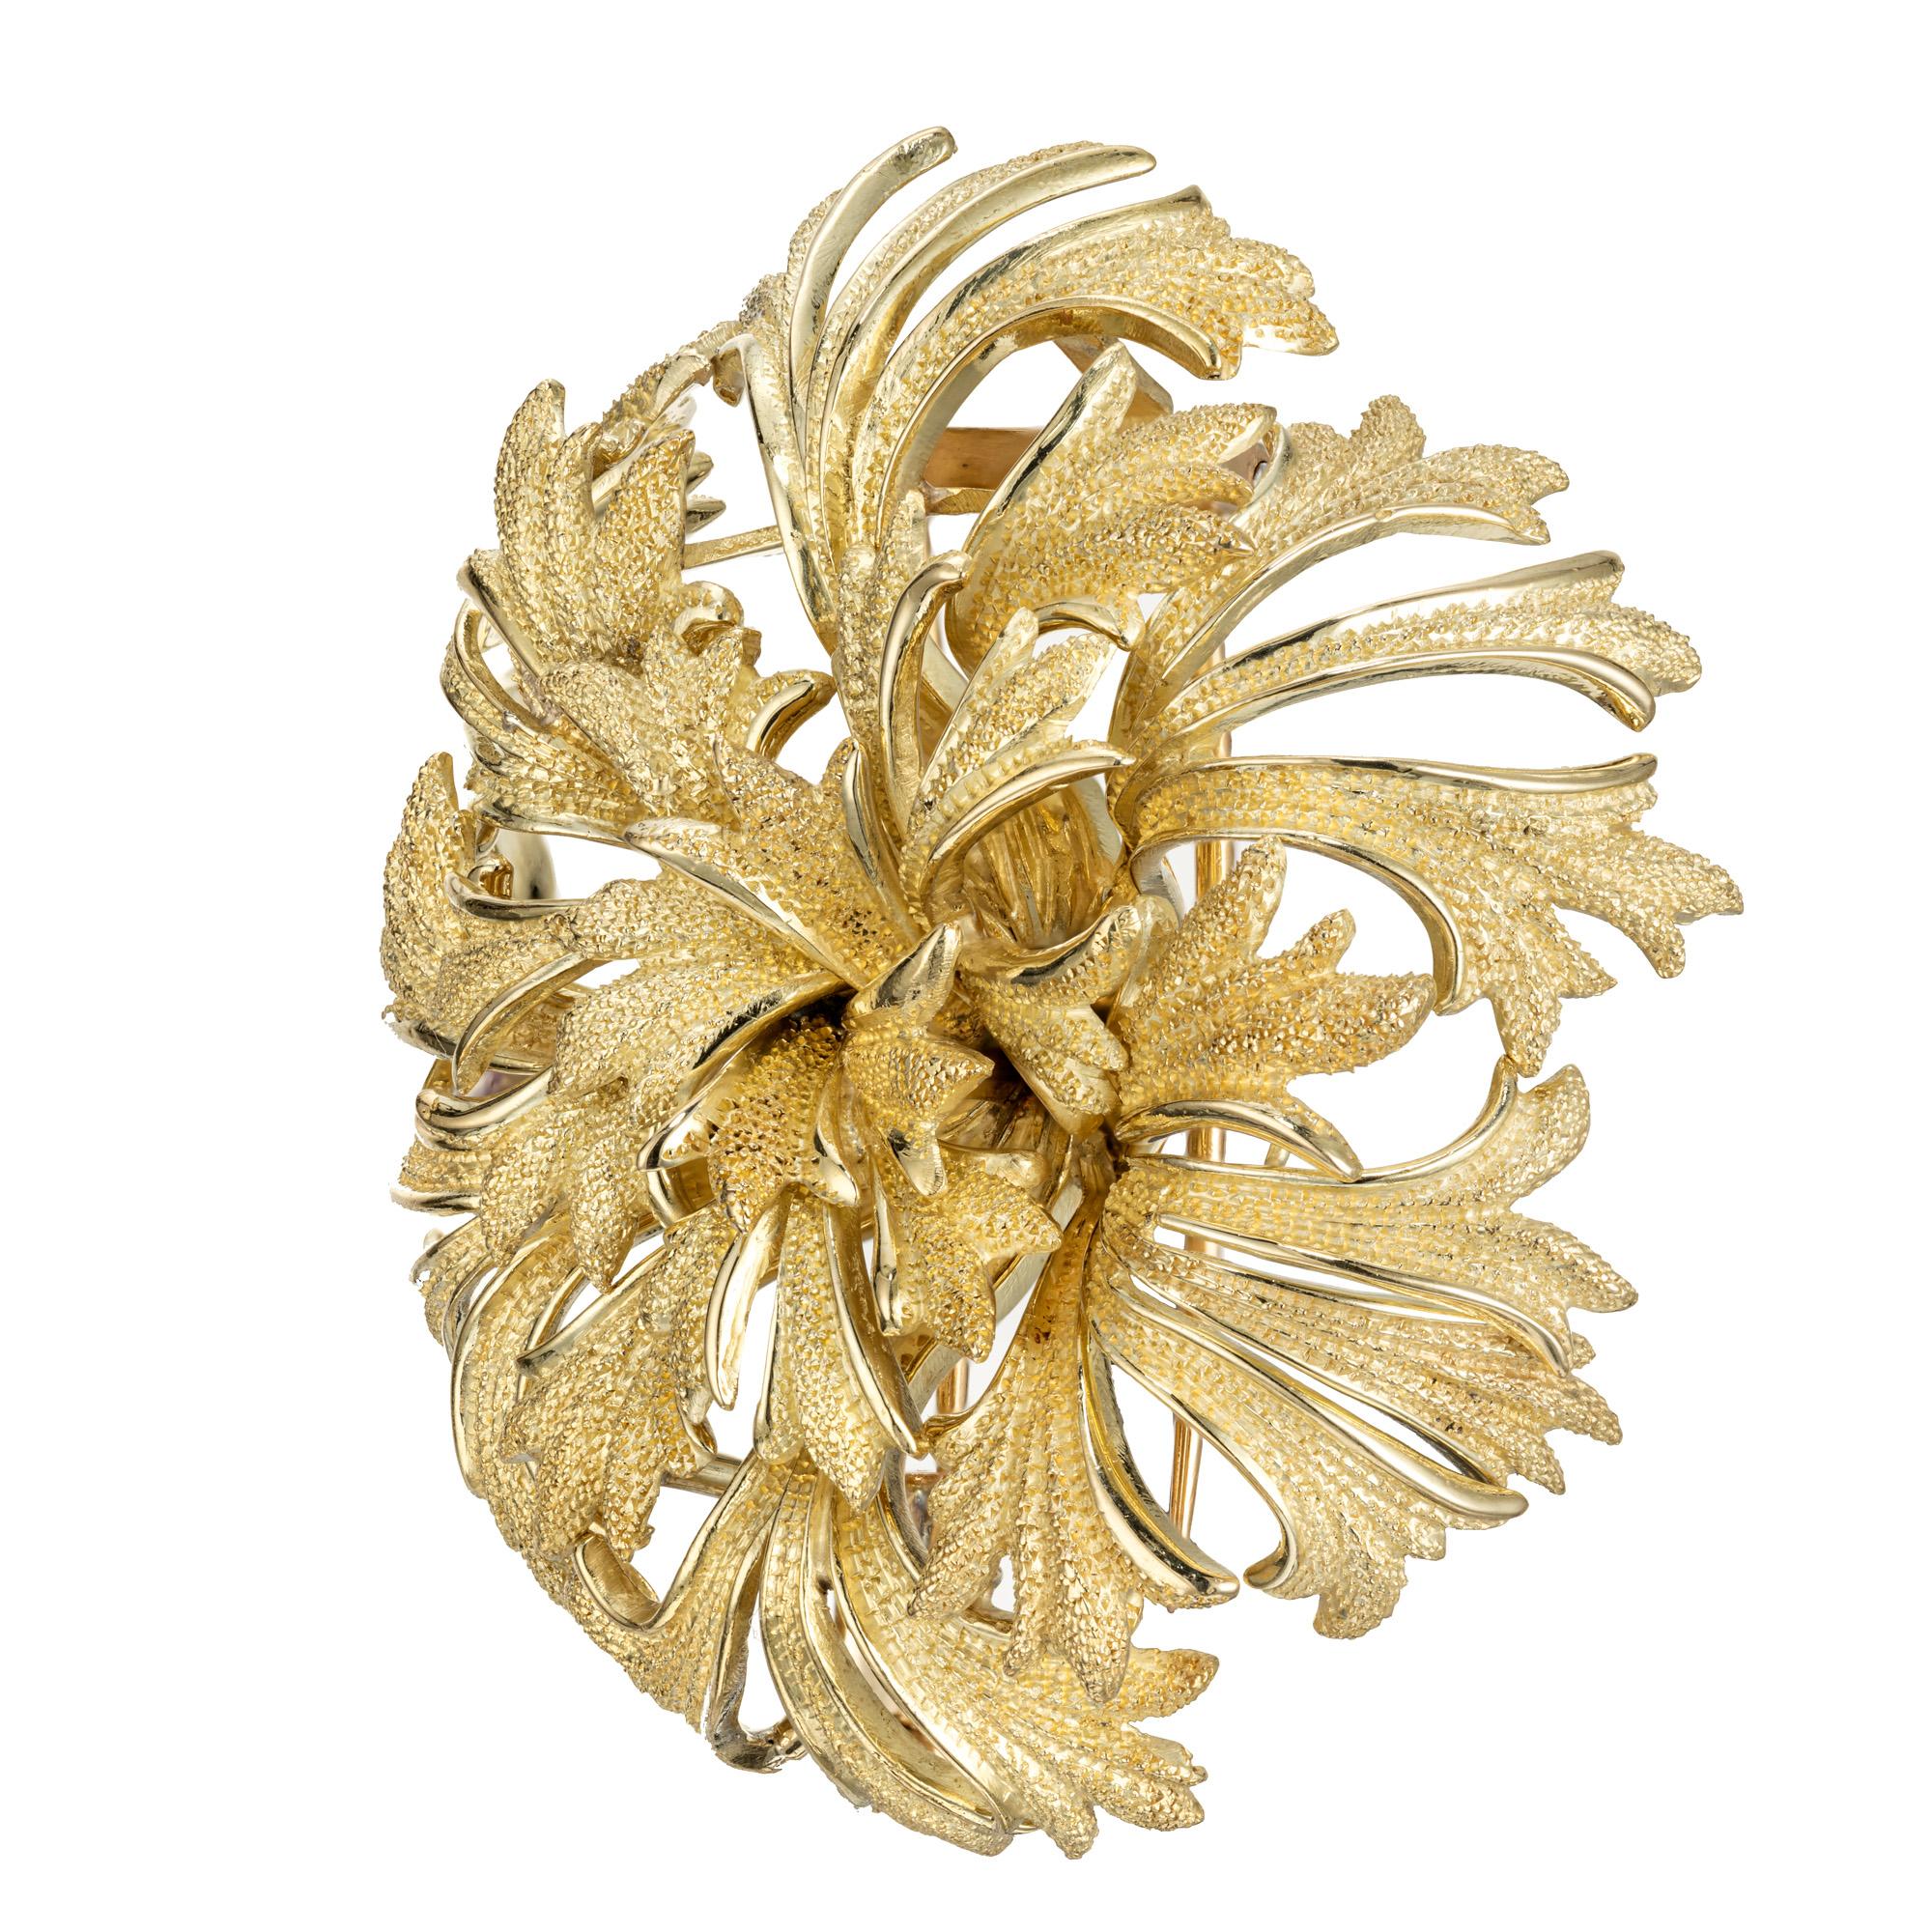 Tiffany & Co 18k gold brooch designed with detailed petals enhanced with a Florentine texture.  circa 1960's

18k yellow gold 
Stamped: 18k
Hallmark: Tiffany & Co
30.3 grams
Top to bottom: 43.3mm or 1.70 Inches
Width: 48.7mm or 1.9 Inches
Depth or